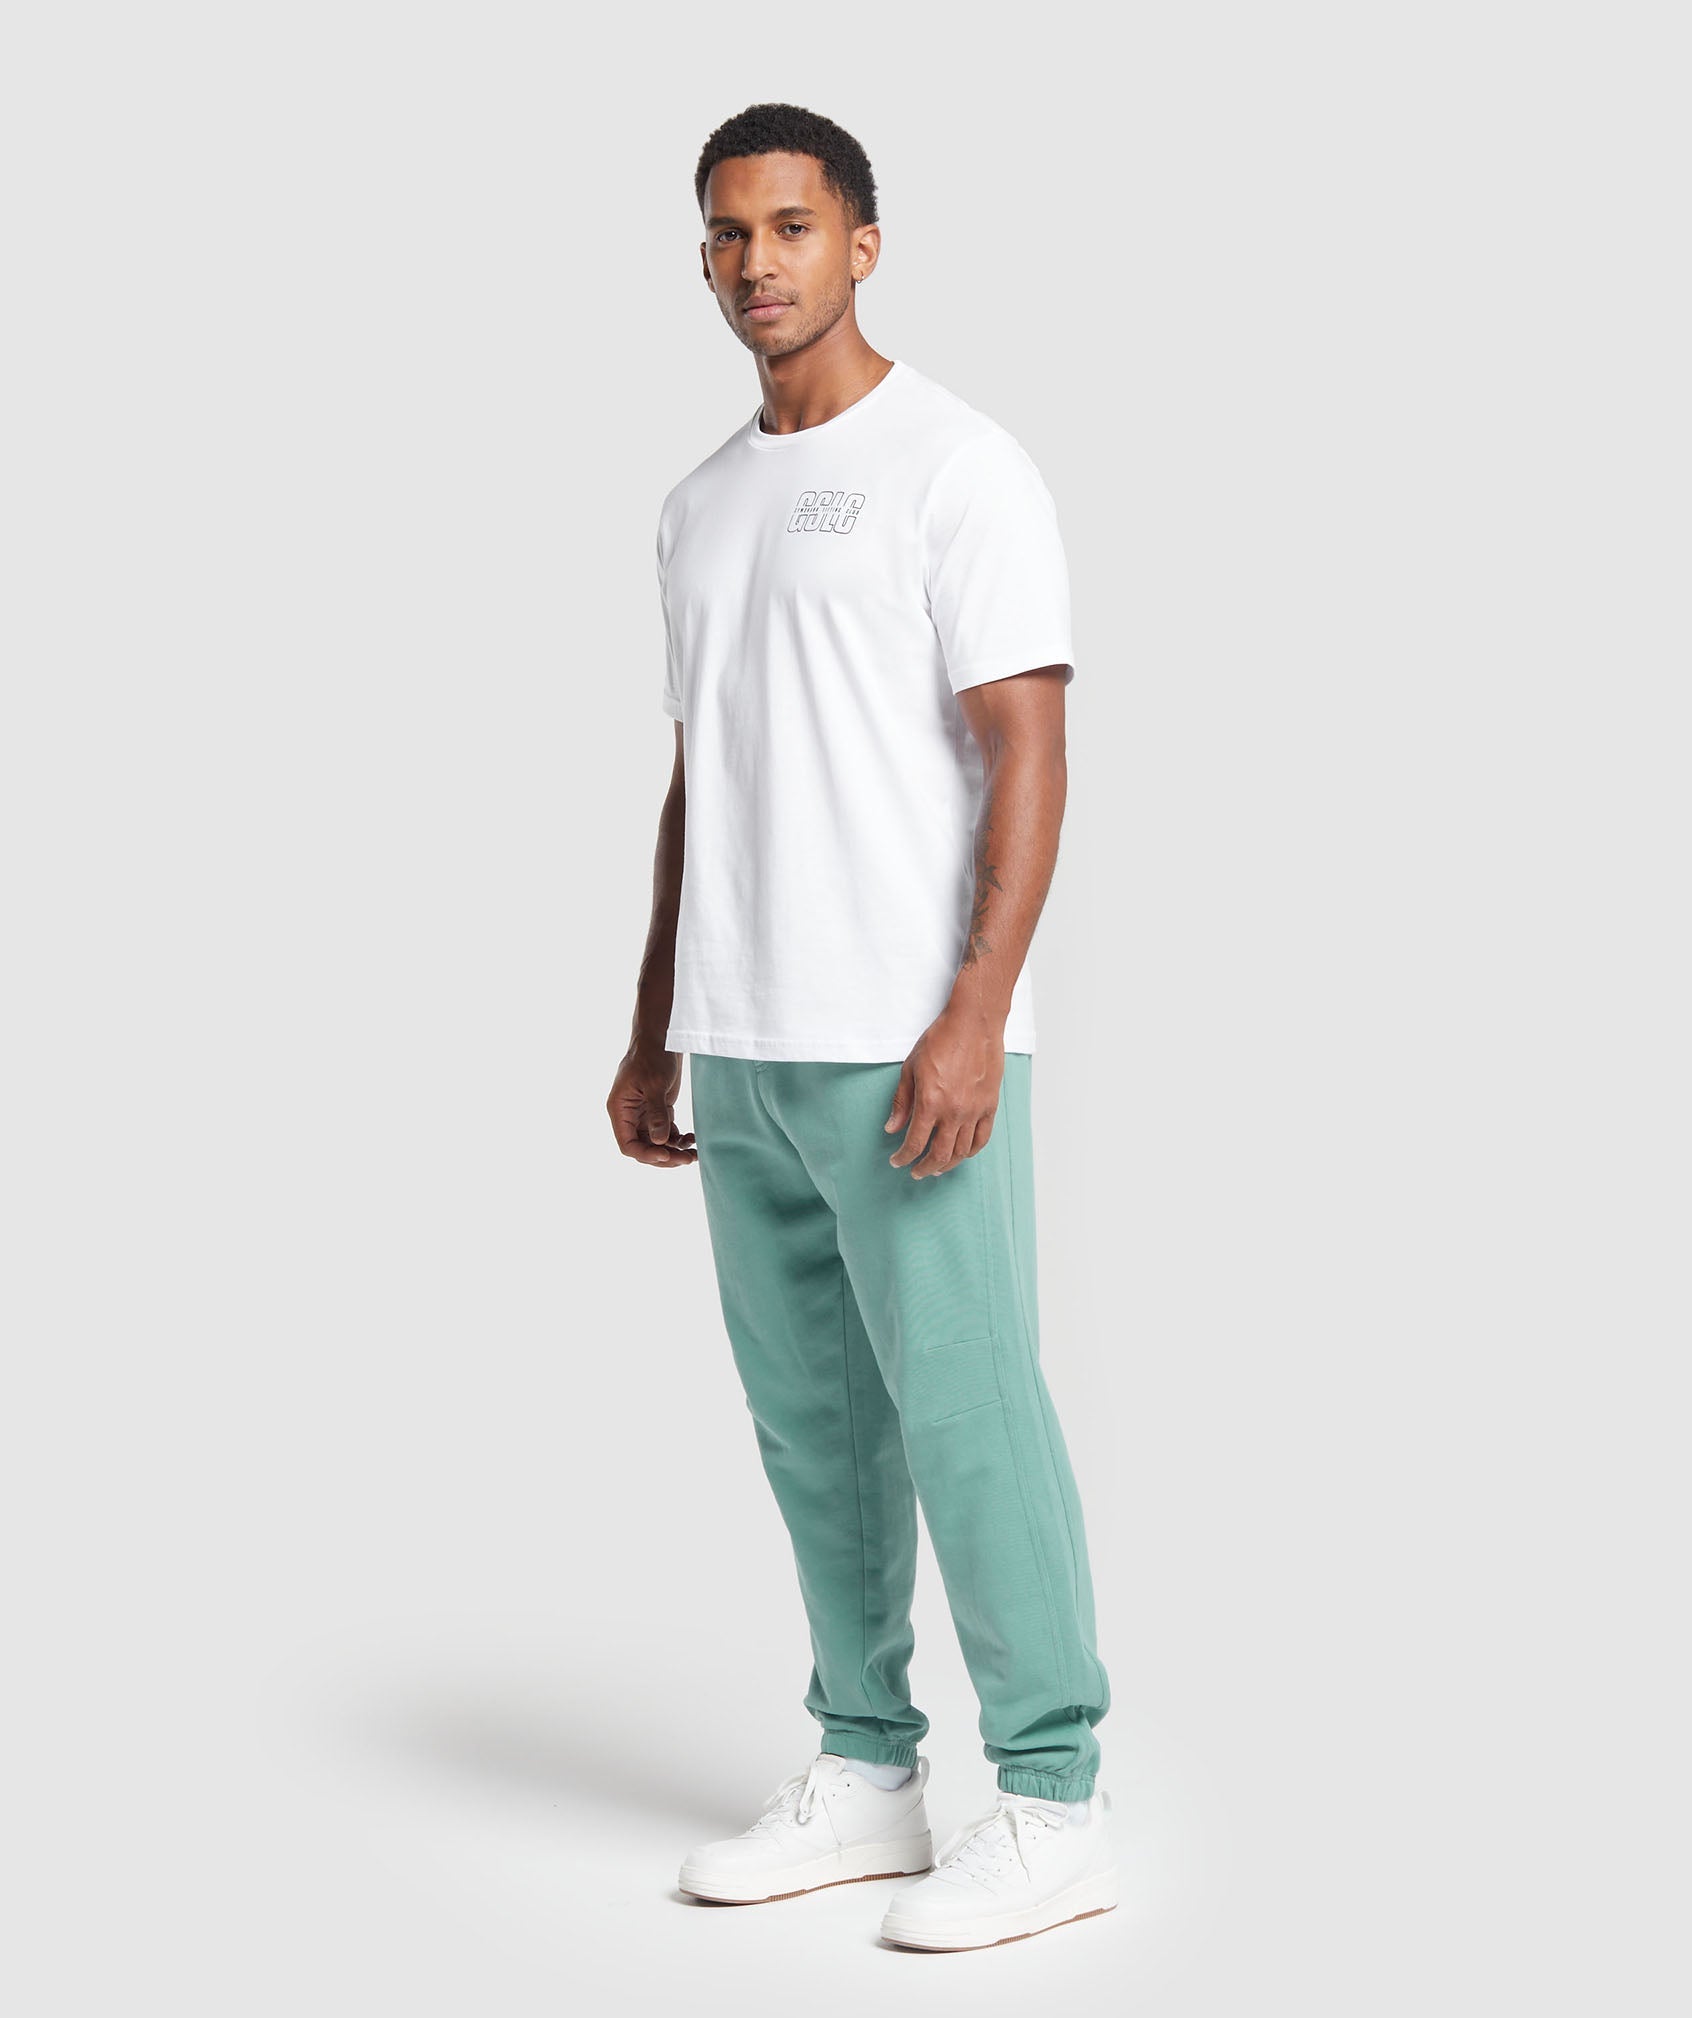 Rest Day Essentials Joggers in Duck Egg Blue - view 4